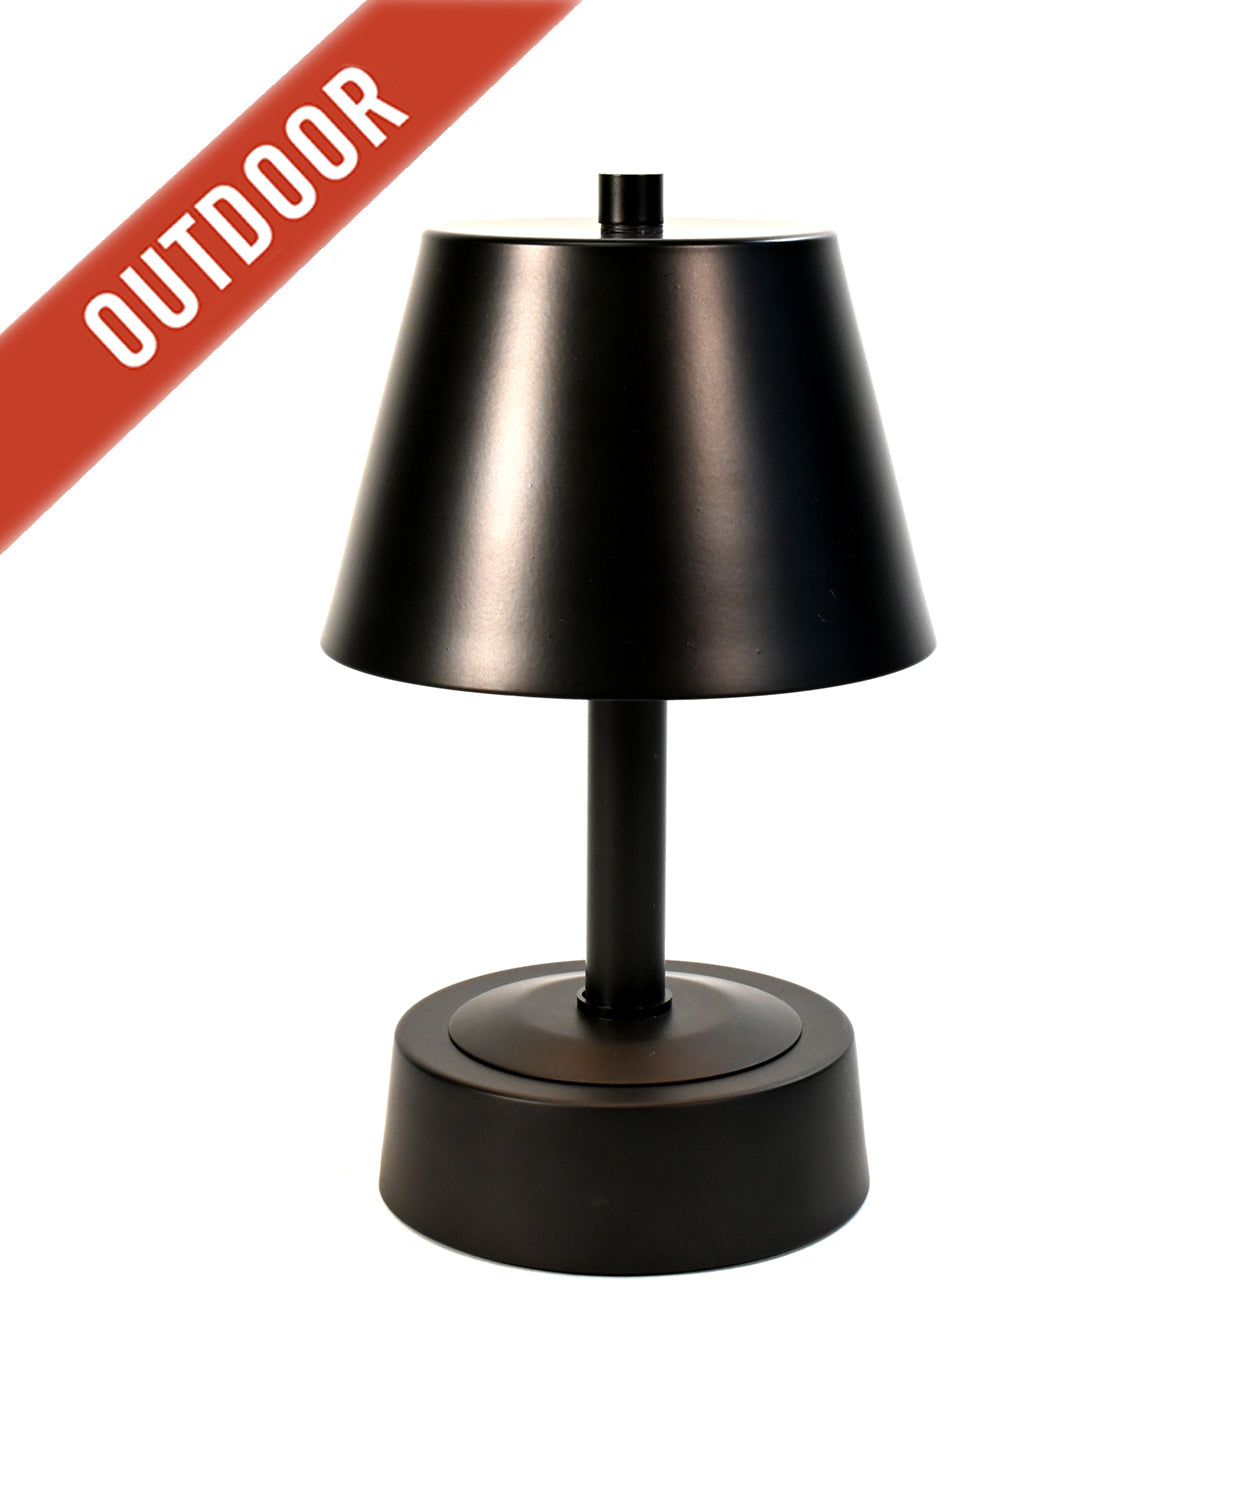 SOMMARLÅNKE LED decorative table lamp, battery operated outdoor